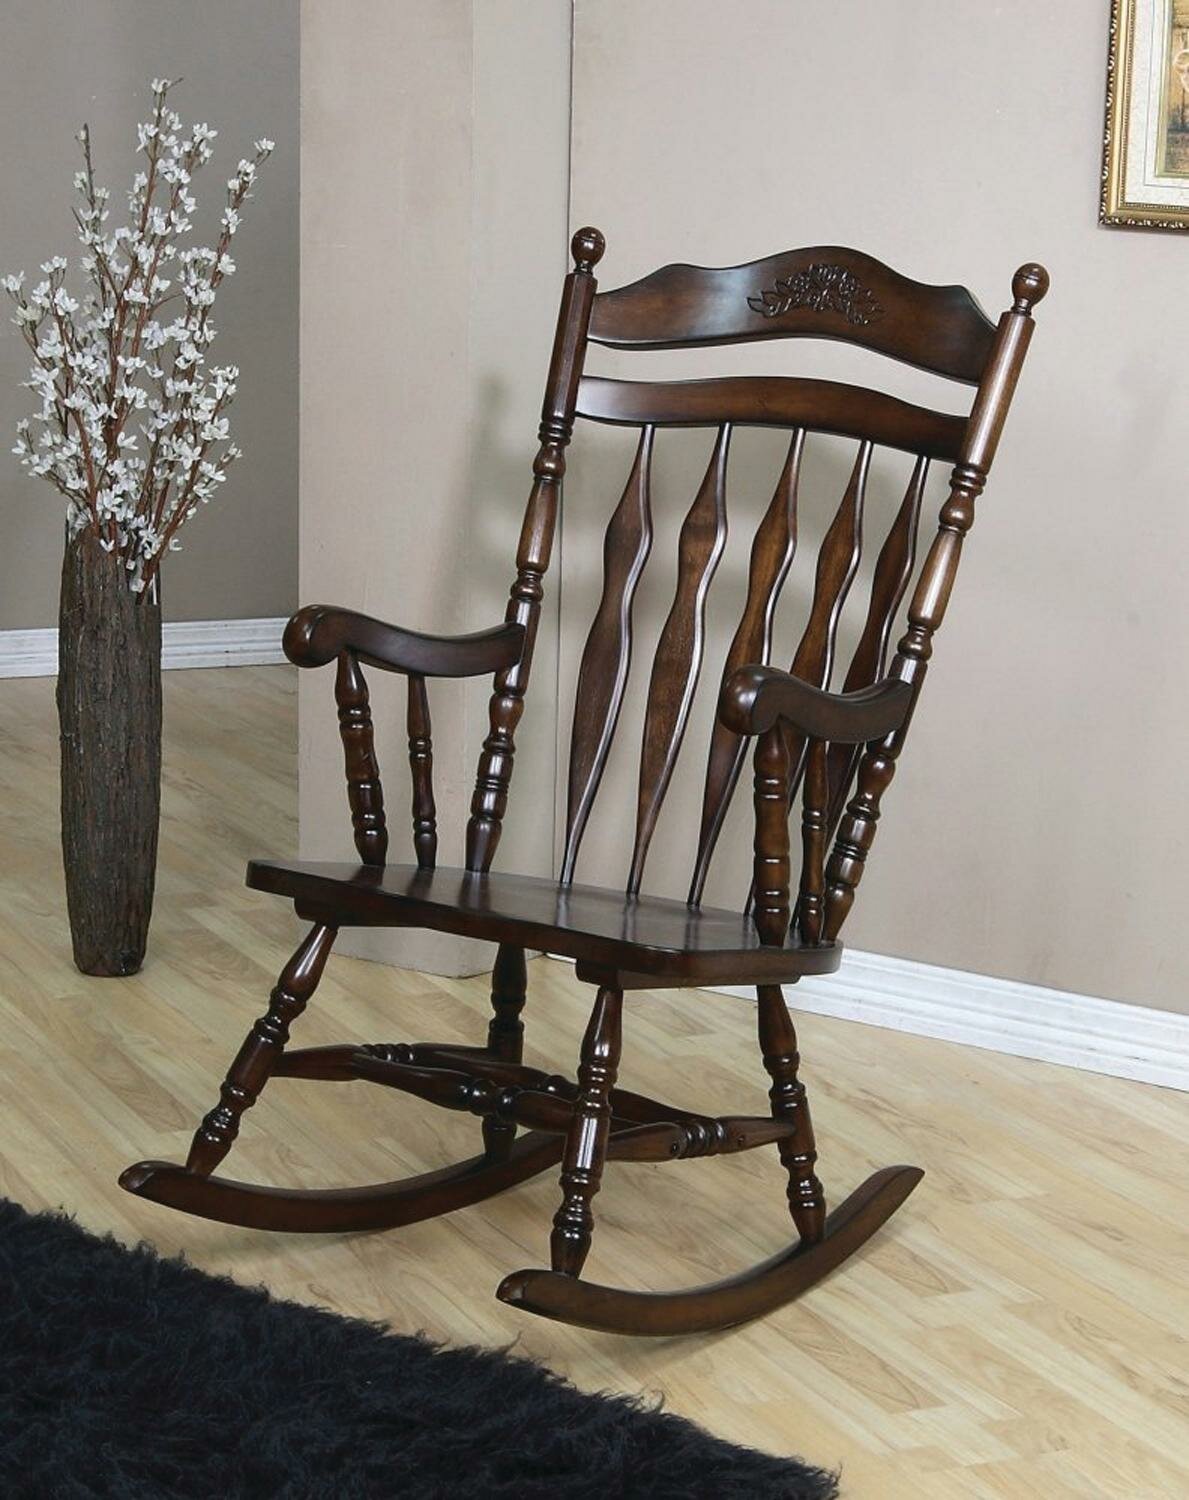 Charlton Home Frasure Traditional Windsor Style Wooden Rocking